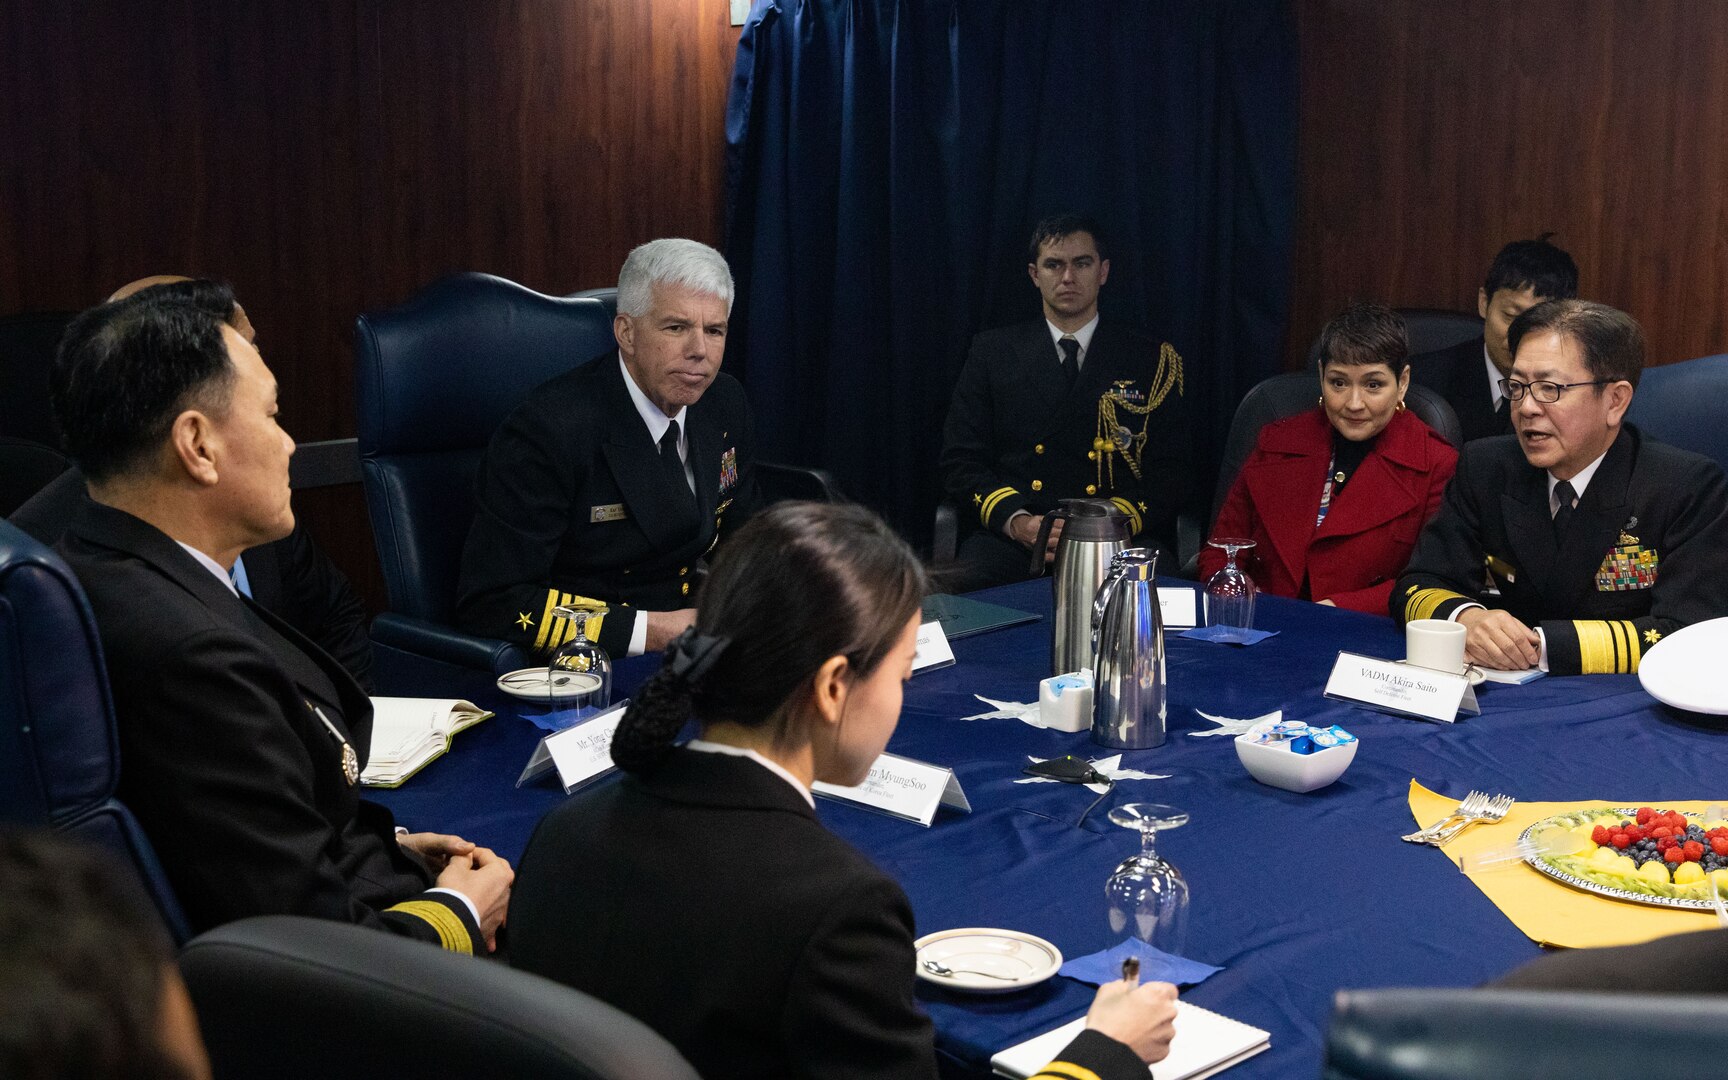 230222-N-GR847-2031 YOKOSUKA, Japan (Feb. 22, 2023) - Commander, Japan Maritime Self-Defense Force Self-Defense Fleet, Vice Adm. SAITO Akira, speaks during a tri-lateral meeting with Commander, U.S. 7th Fleet, Vice Adm. Karl Thomas, and Republic of Korea Navy Fleet Commander, Vice Adm. Kim Myung-soo, aboard U.S. 7th Fleet flagship USS Blue Ridge (LCC 19), Feb. 22. 7th Fleet is the U.S. Navy’s largest forward-deployed numbered fleet and routinely interacts and operates with Allies and partners in preserving a free and open Indo-Pacific region. (U.S. Navy photo by Mass Communication Specialist 1st Class Reymundo A. Villegas III)